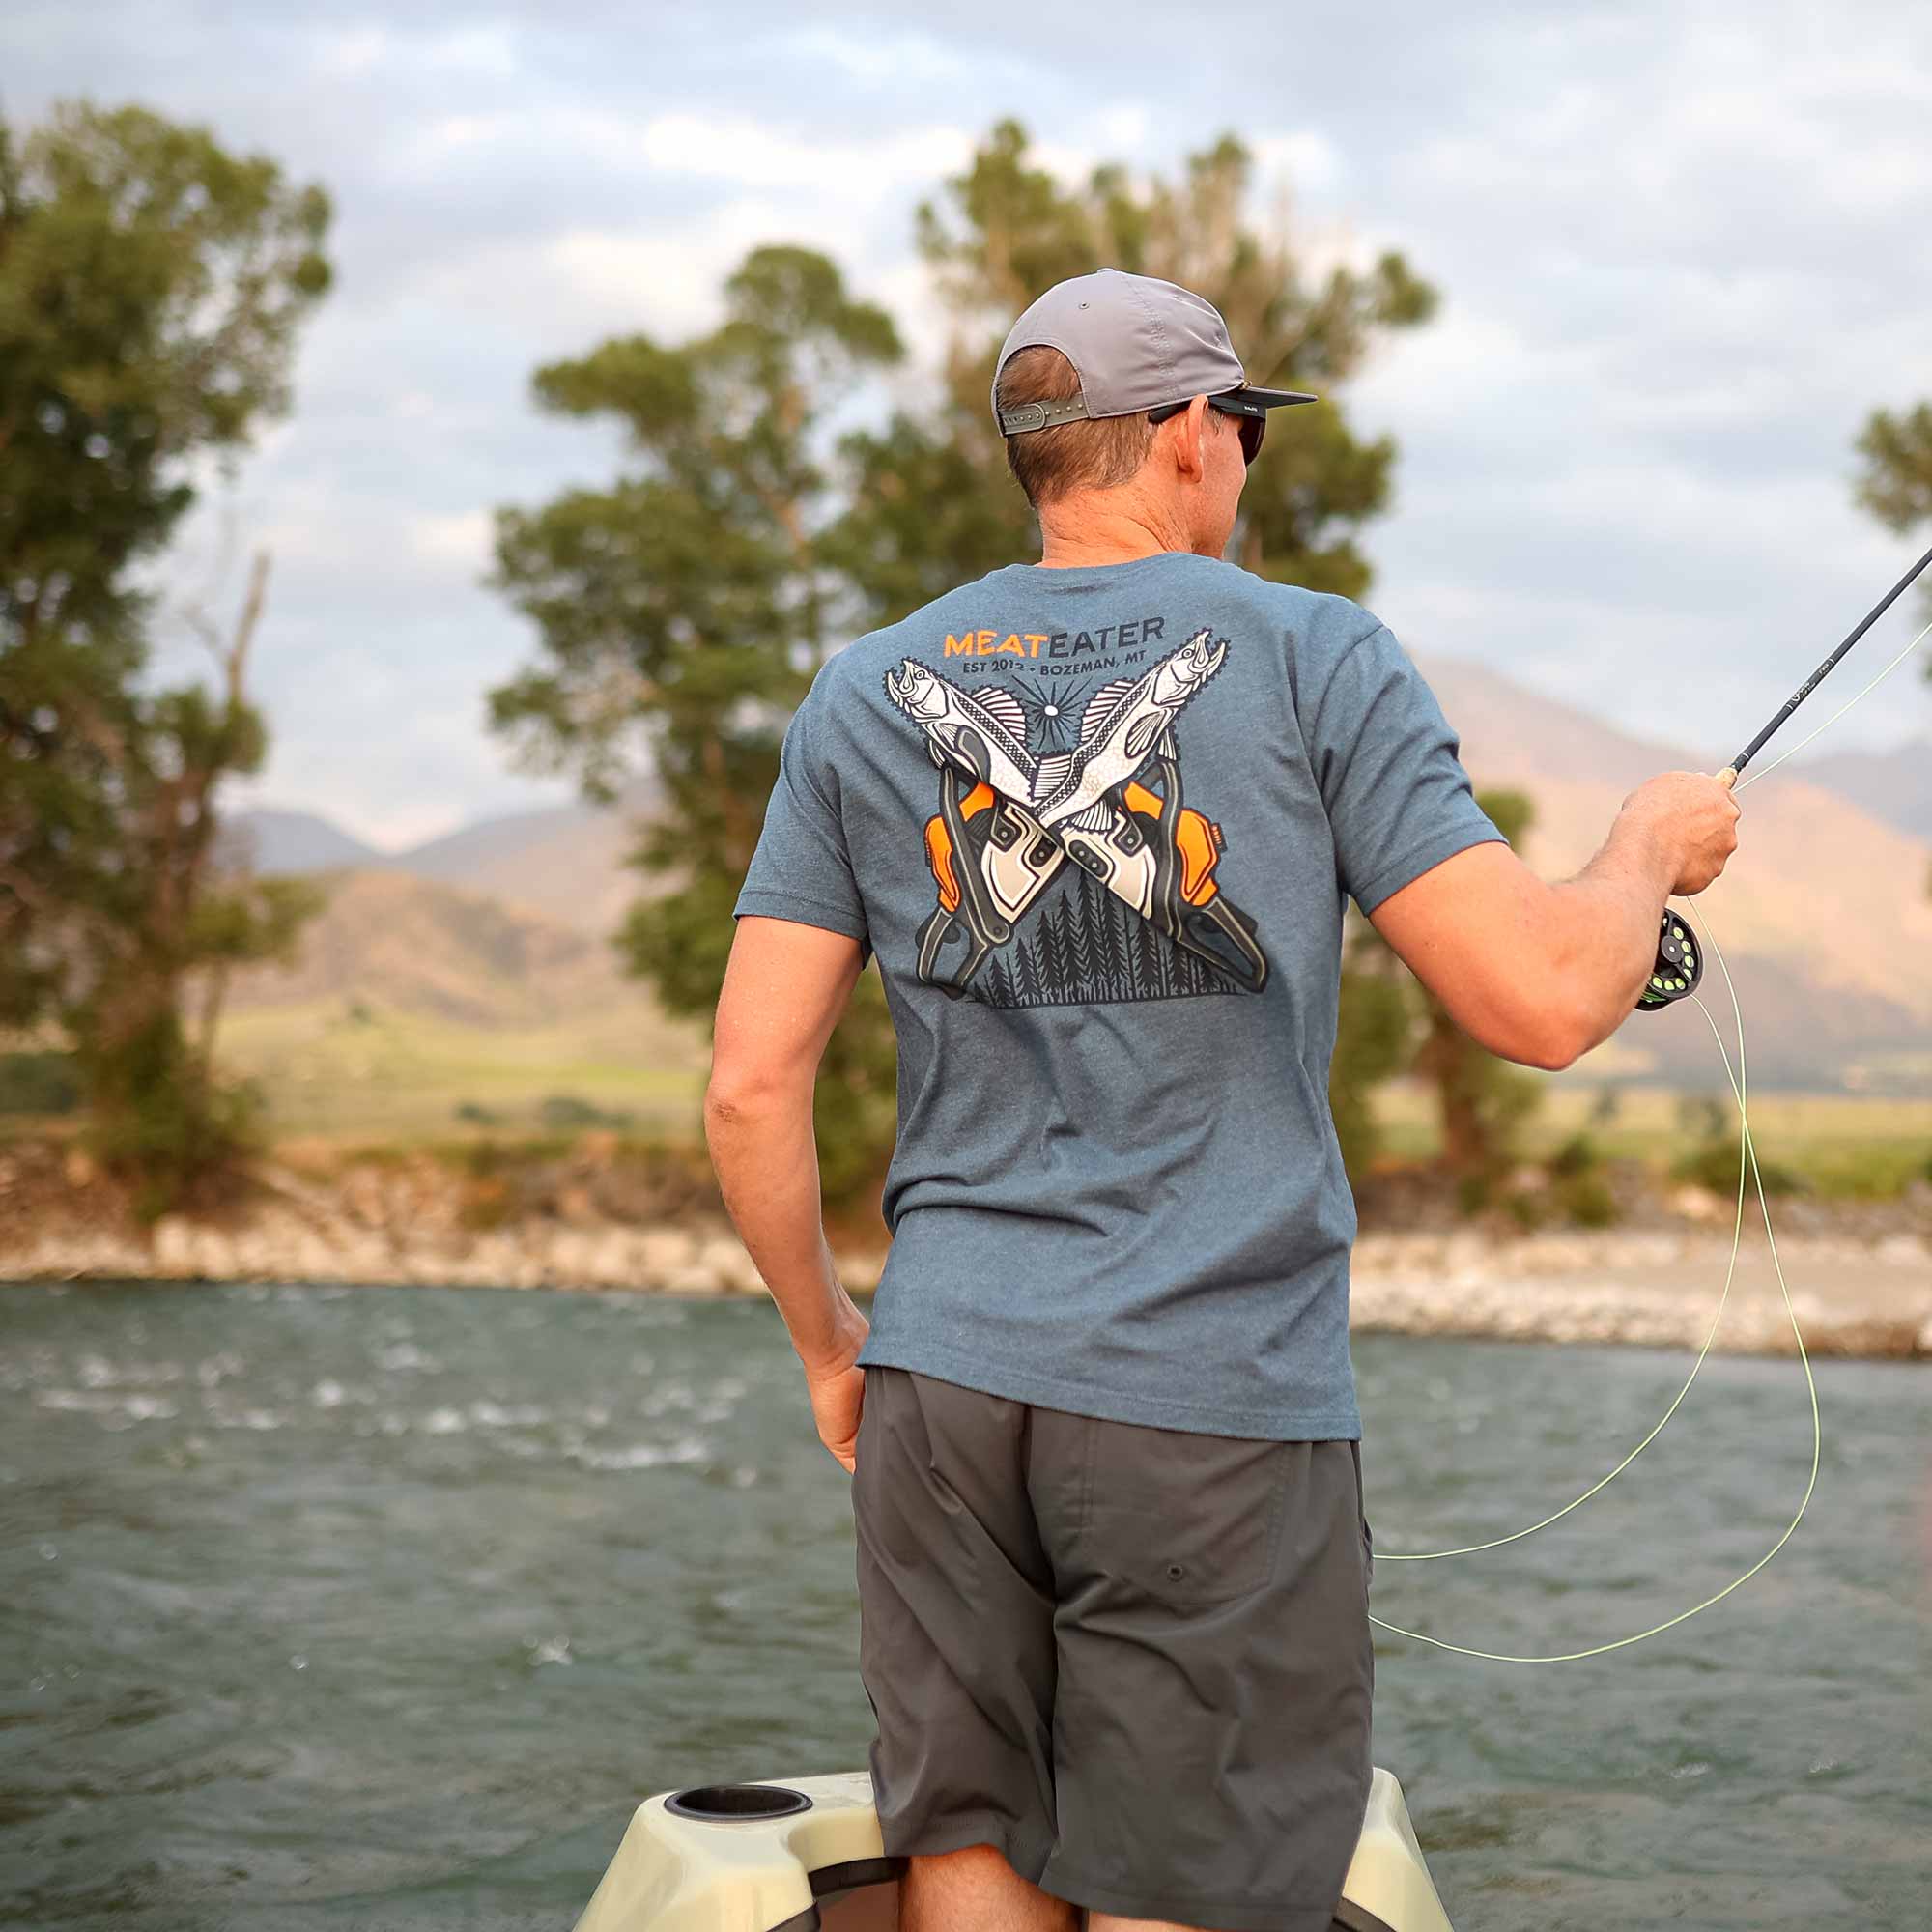 https://store.themeateater.com/on/demandware.static/-/Sites-meateater-master/default/dw22f0676a/walleye-saw-t-shirt/Walleye-Saw-T-Shirt_global_field-1.jpg